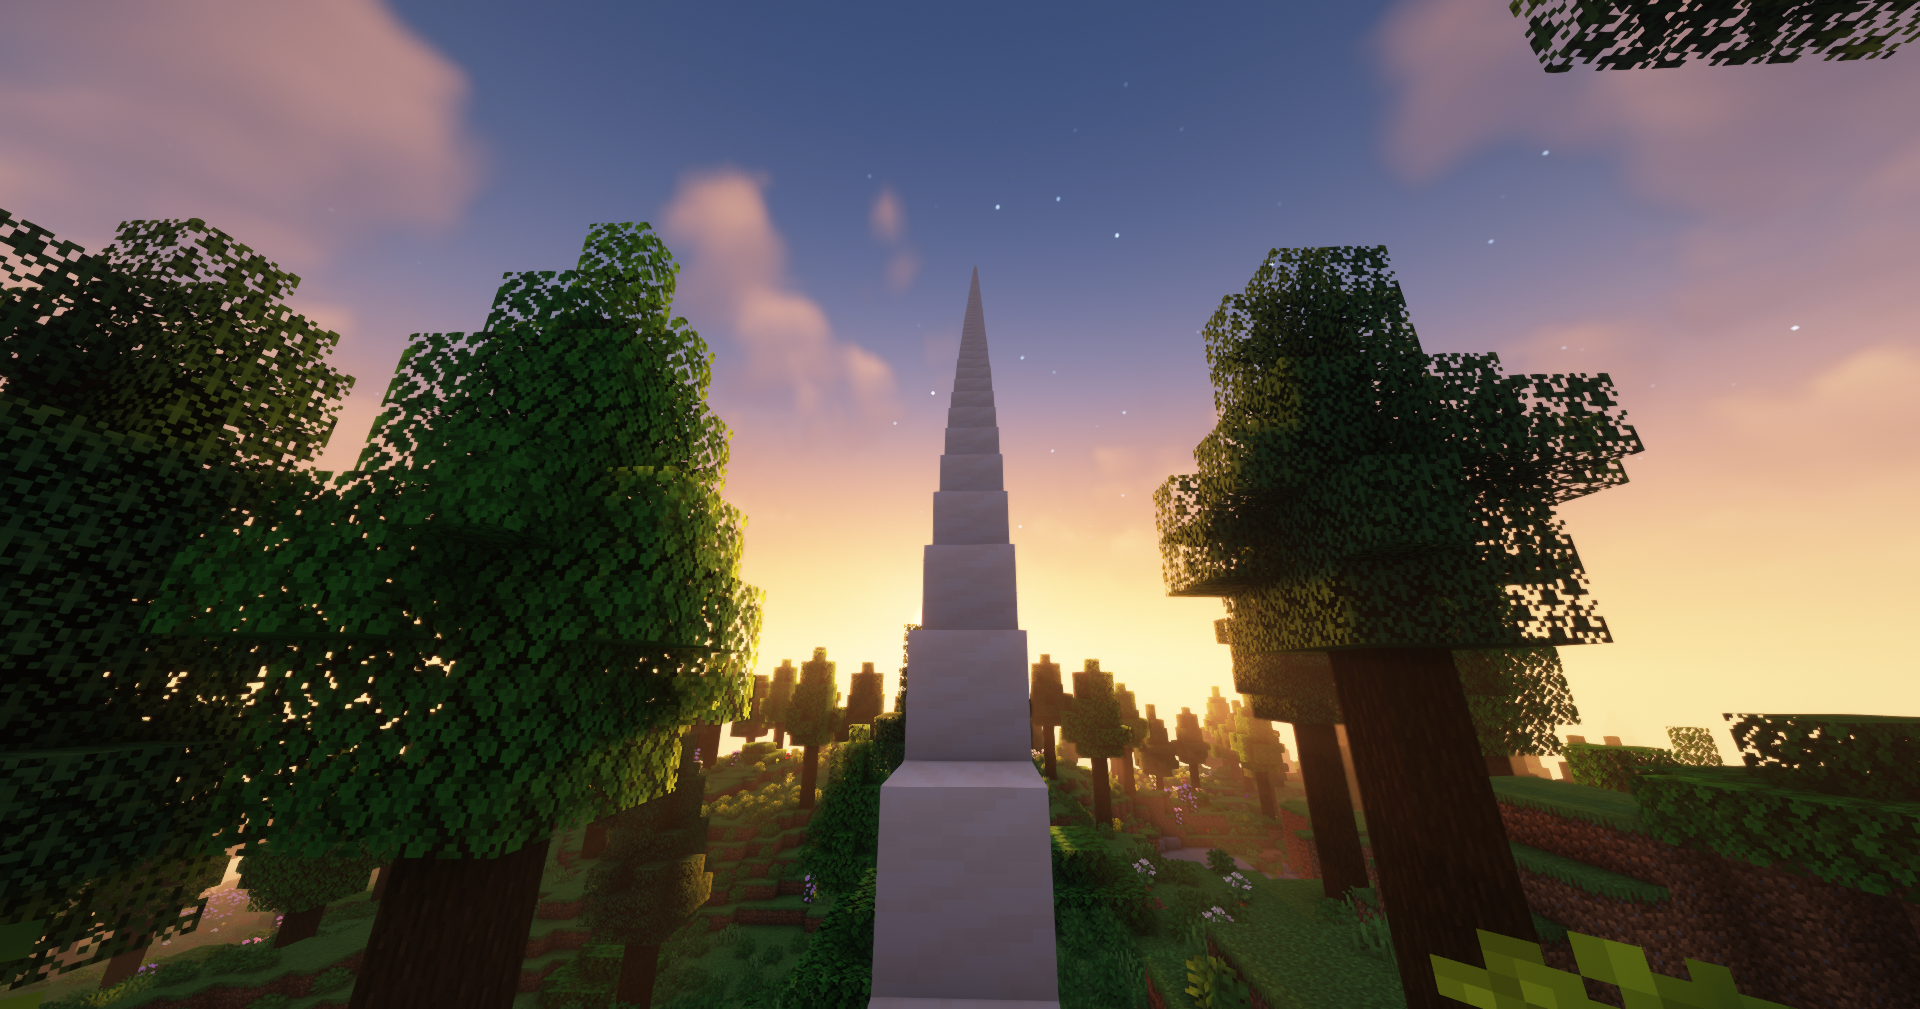 Instantly build staircases! 
Terrain: BoP, Visuals: Complementary Shaders